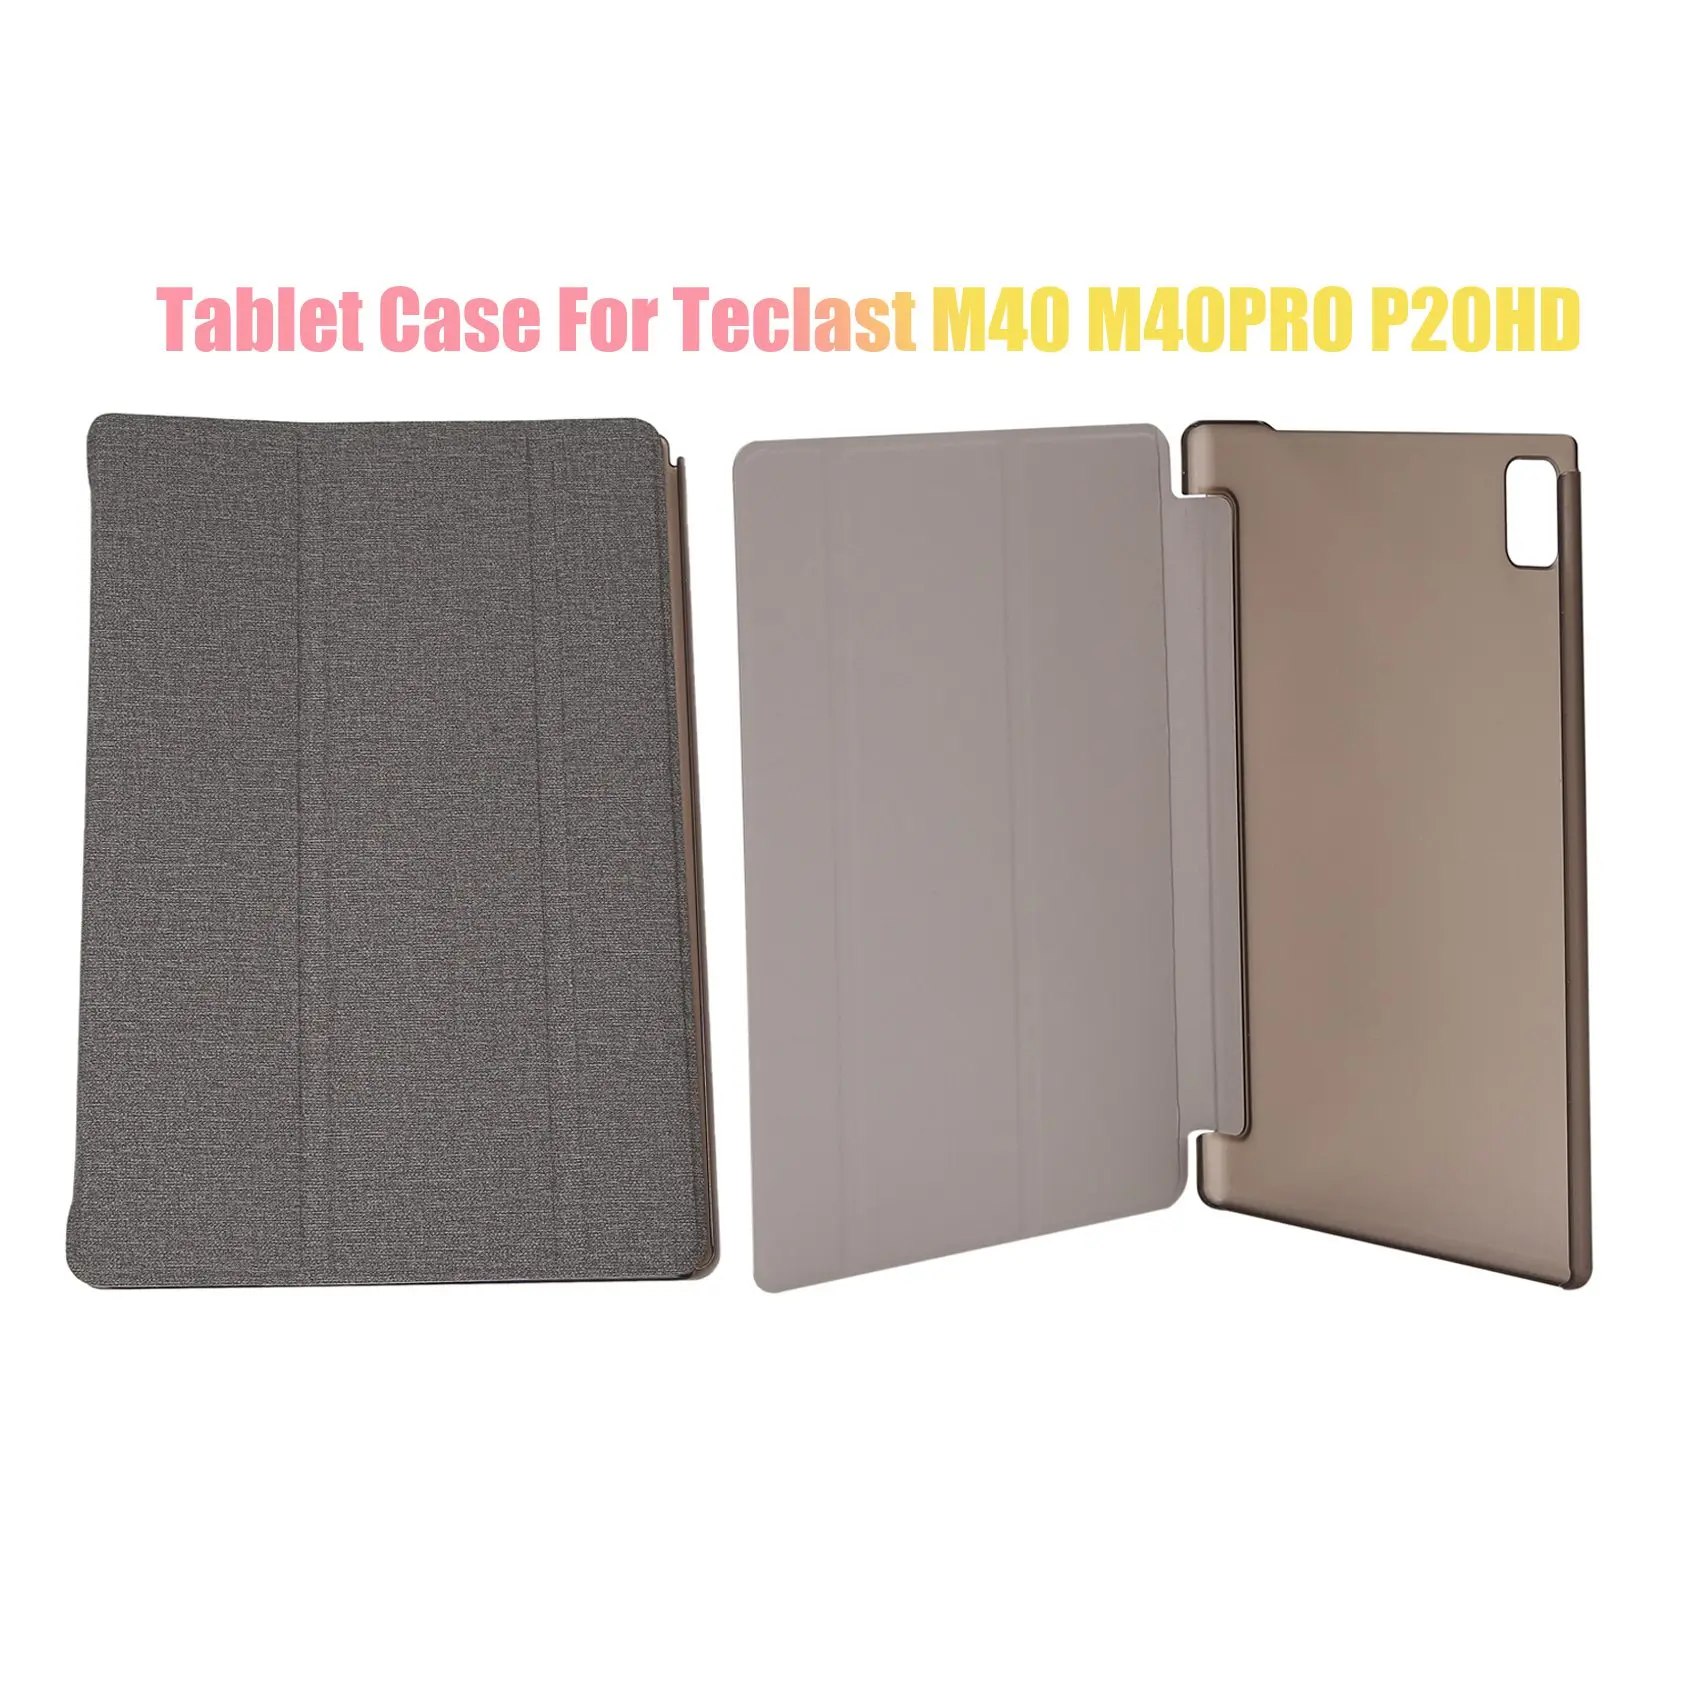 

Tablet Case for Teclast M40 M40PRO P20HD 10.1 Inch Tablet Anti-Drop Flip Cover Protection Case Tablet Stand (A)